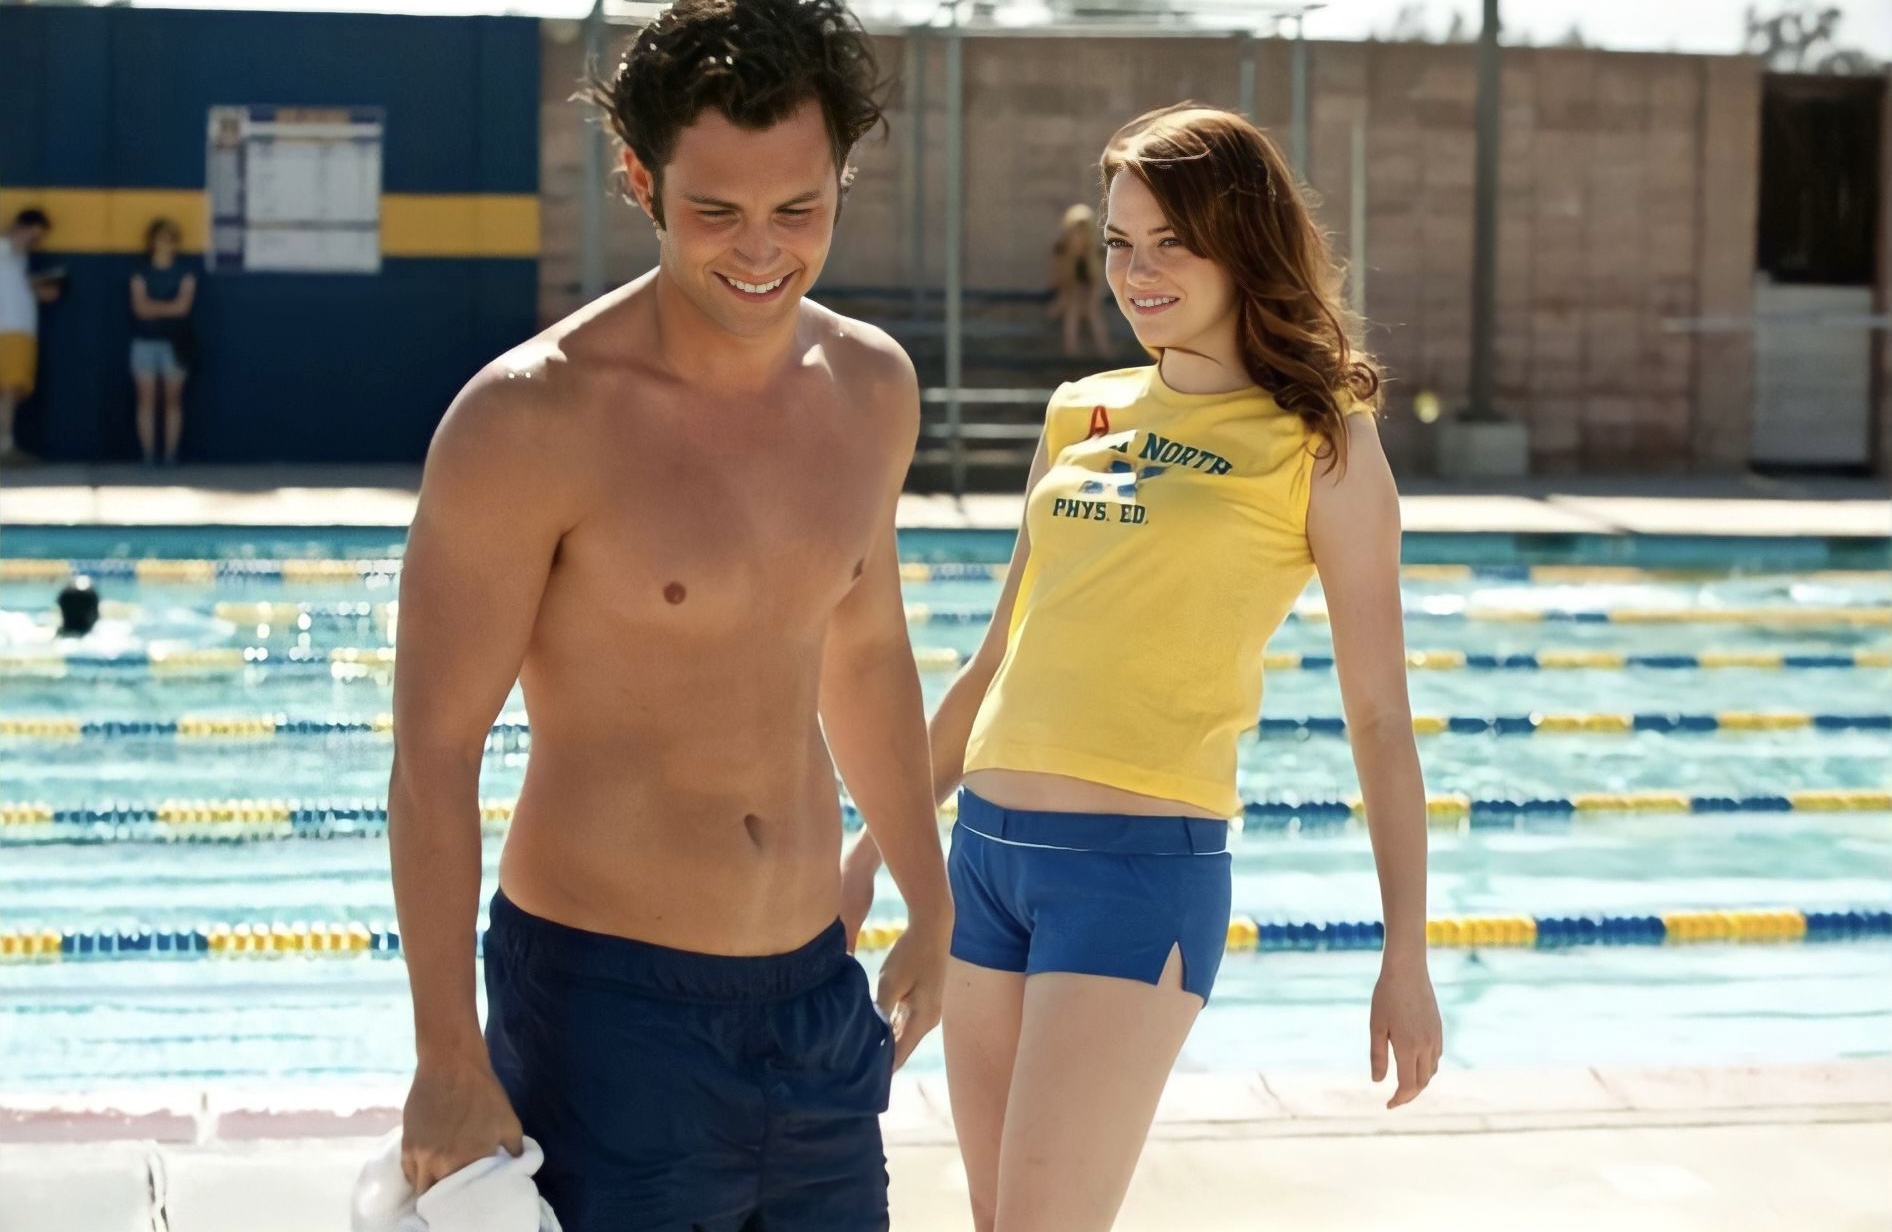 Penn Badgley and Emma Stone in “Easy A”